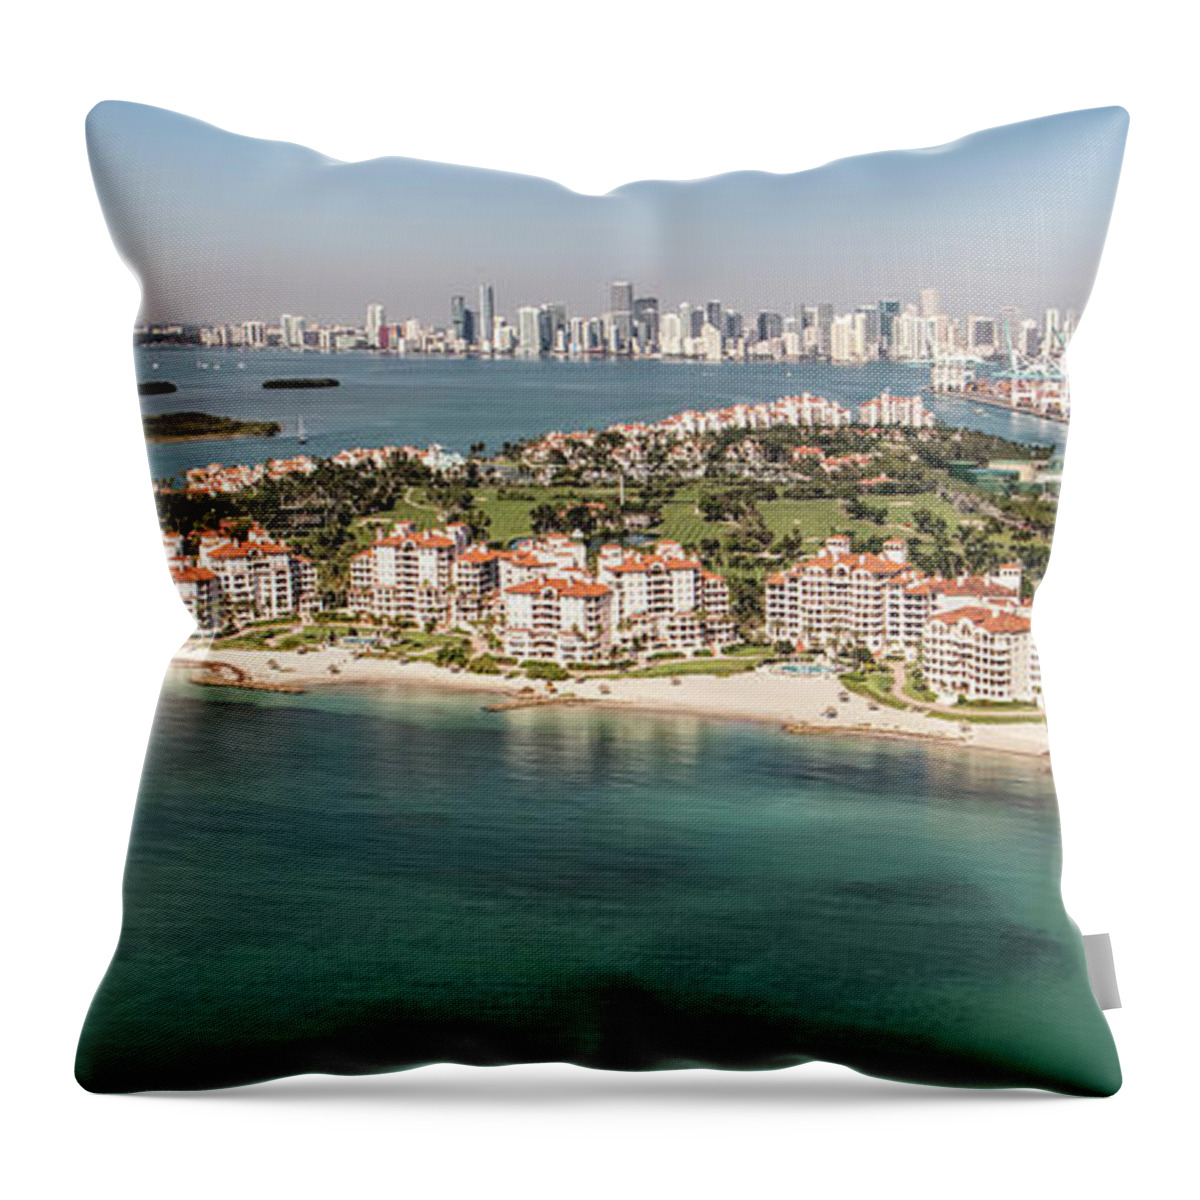 Fisher Island Throw Pillow featuring the photograph Fisher Island Club Aerial by David Oppenheimer